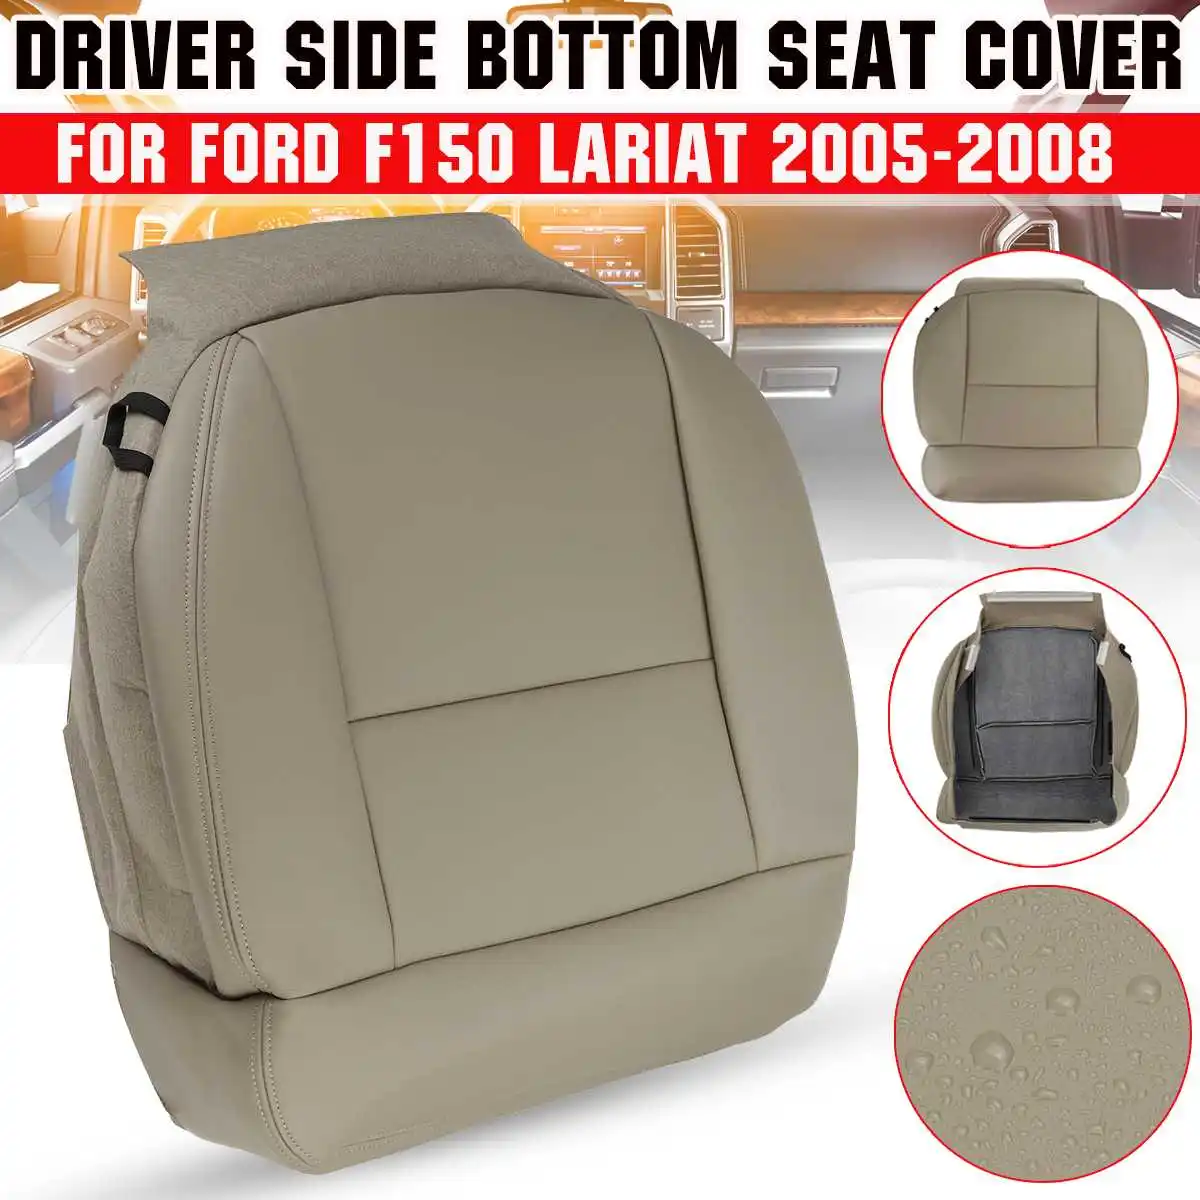 

Auto Front Driver Side Bottom Seat Cover PU Leather Waterproof Cushion Cover For Ford F150 Lariat XL XLT STX FX4 2005-2008